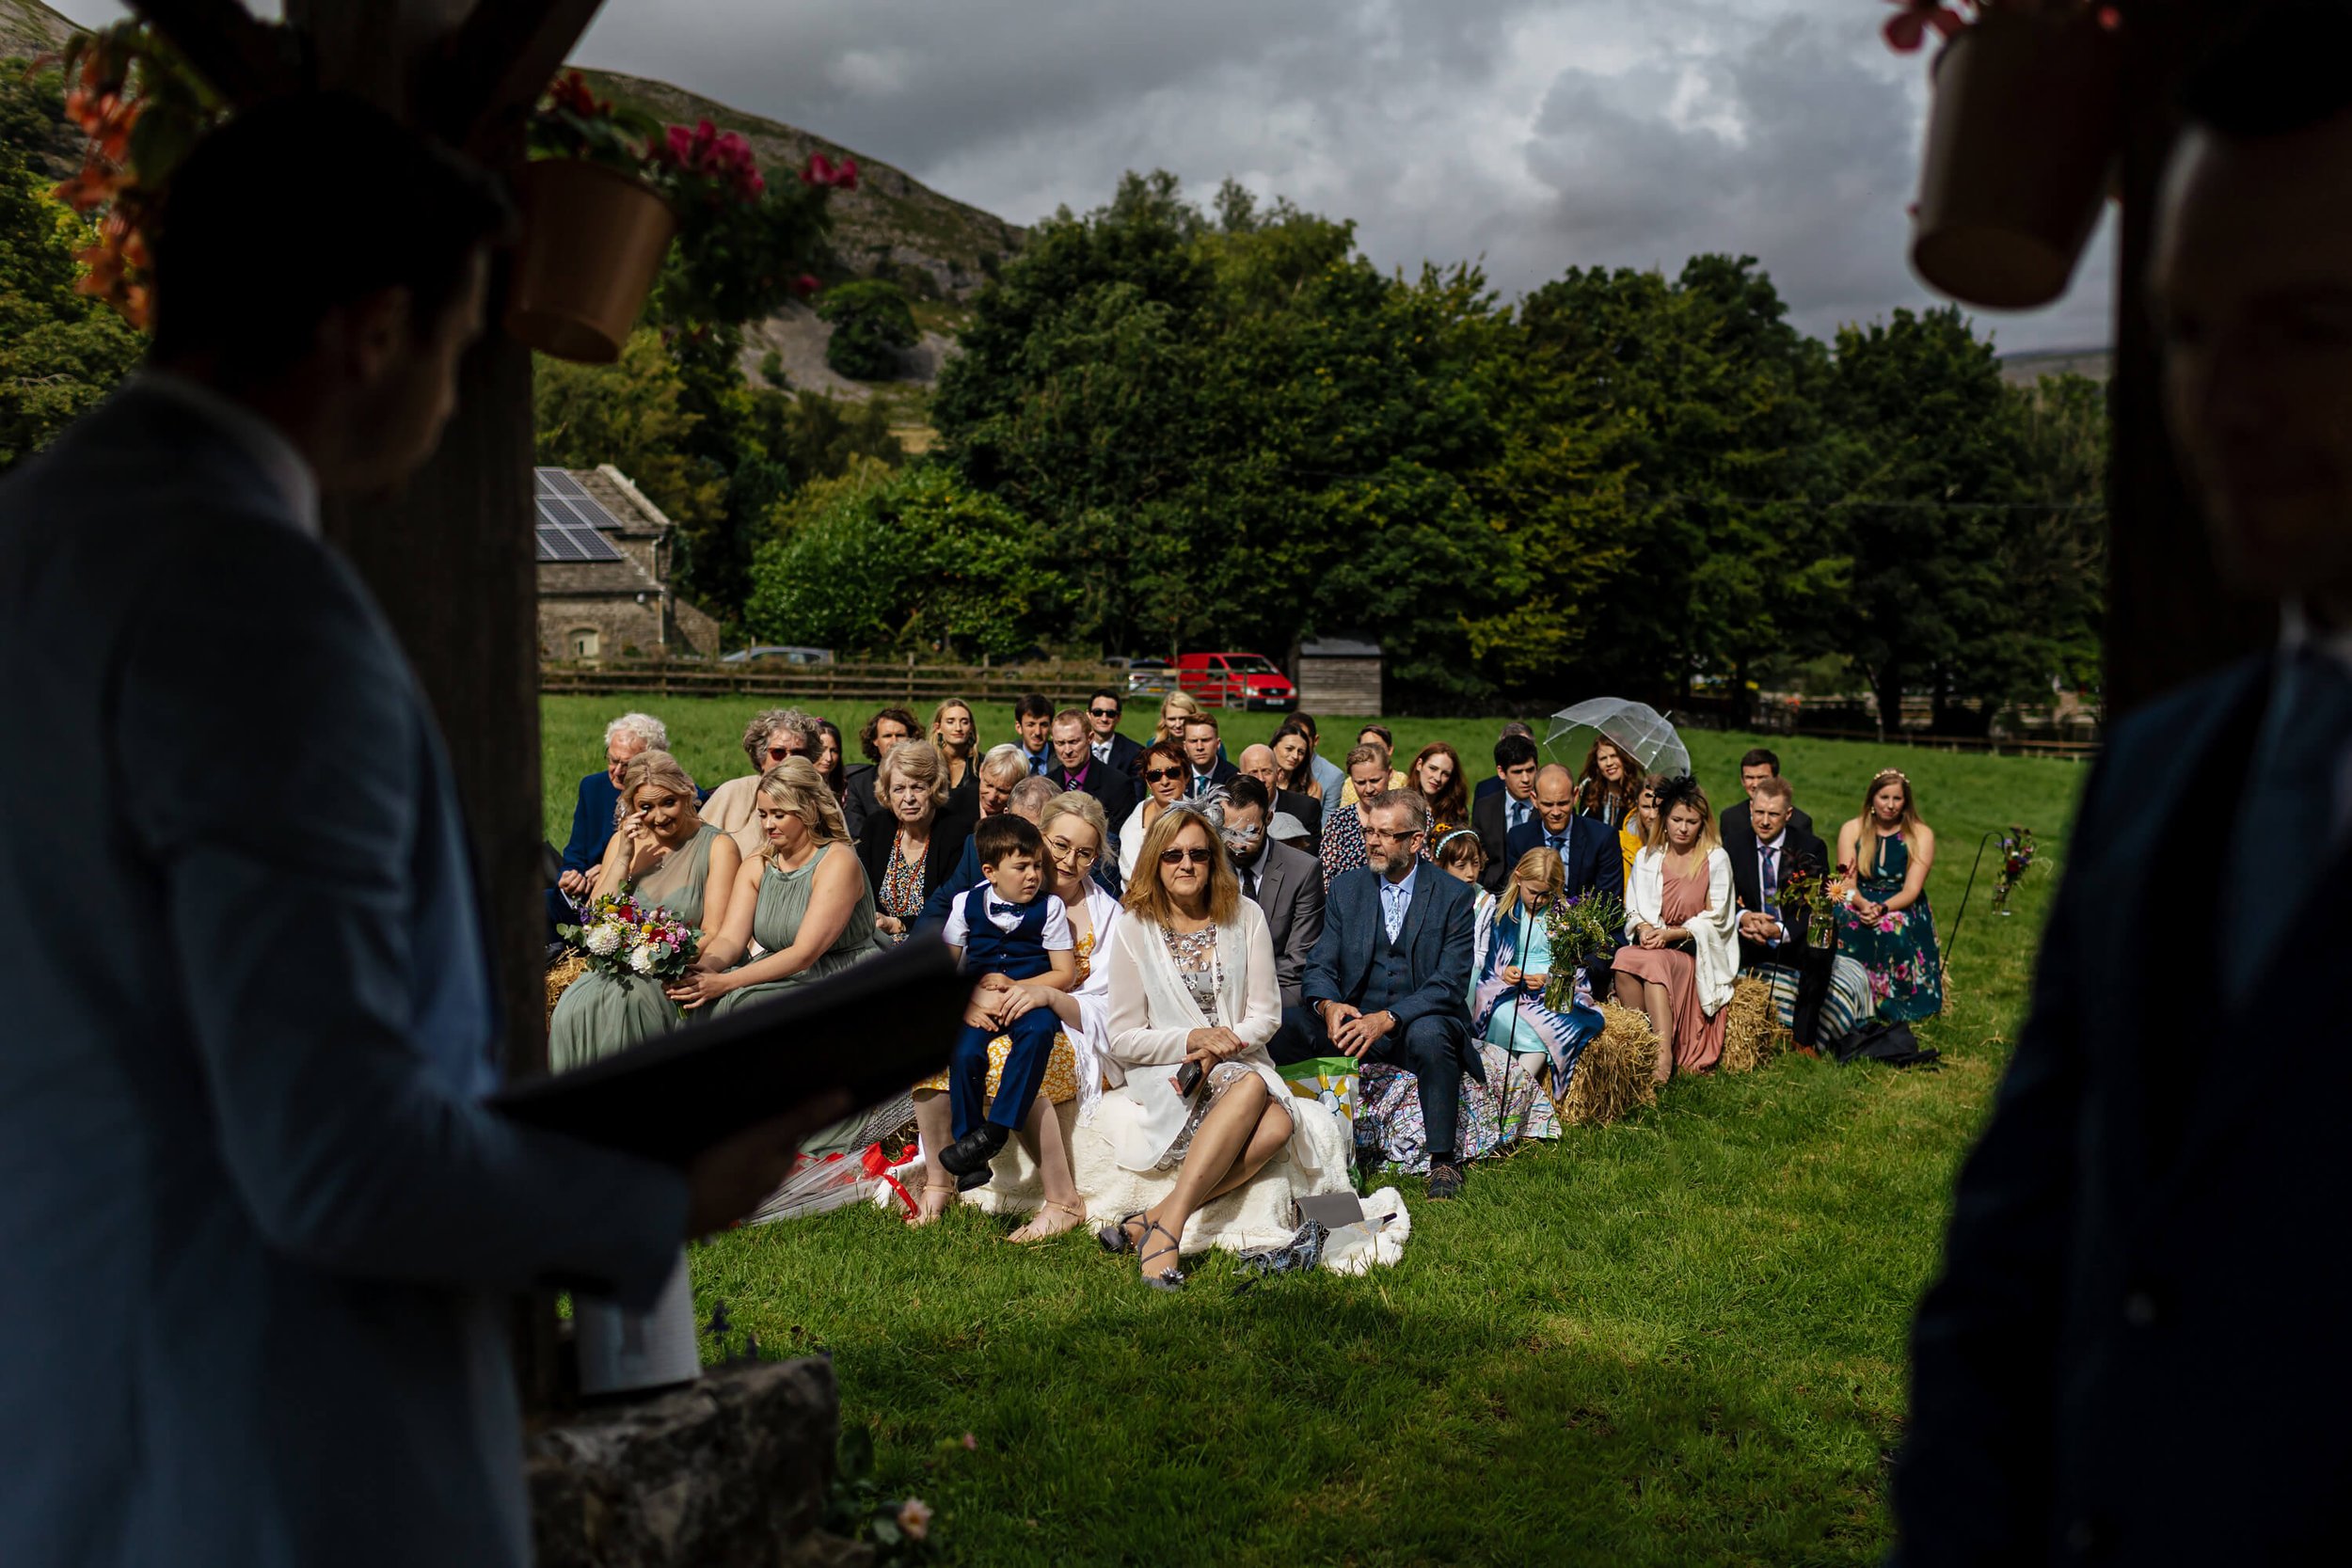 Sun shining on the wedding guests in Yorkshire